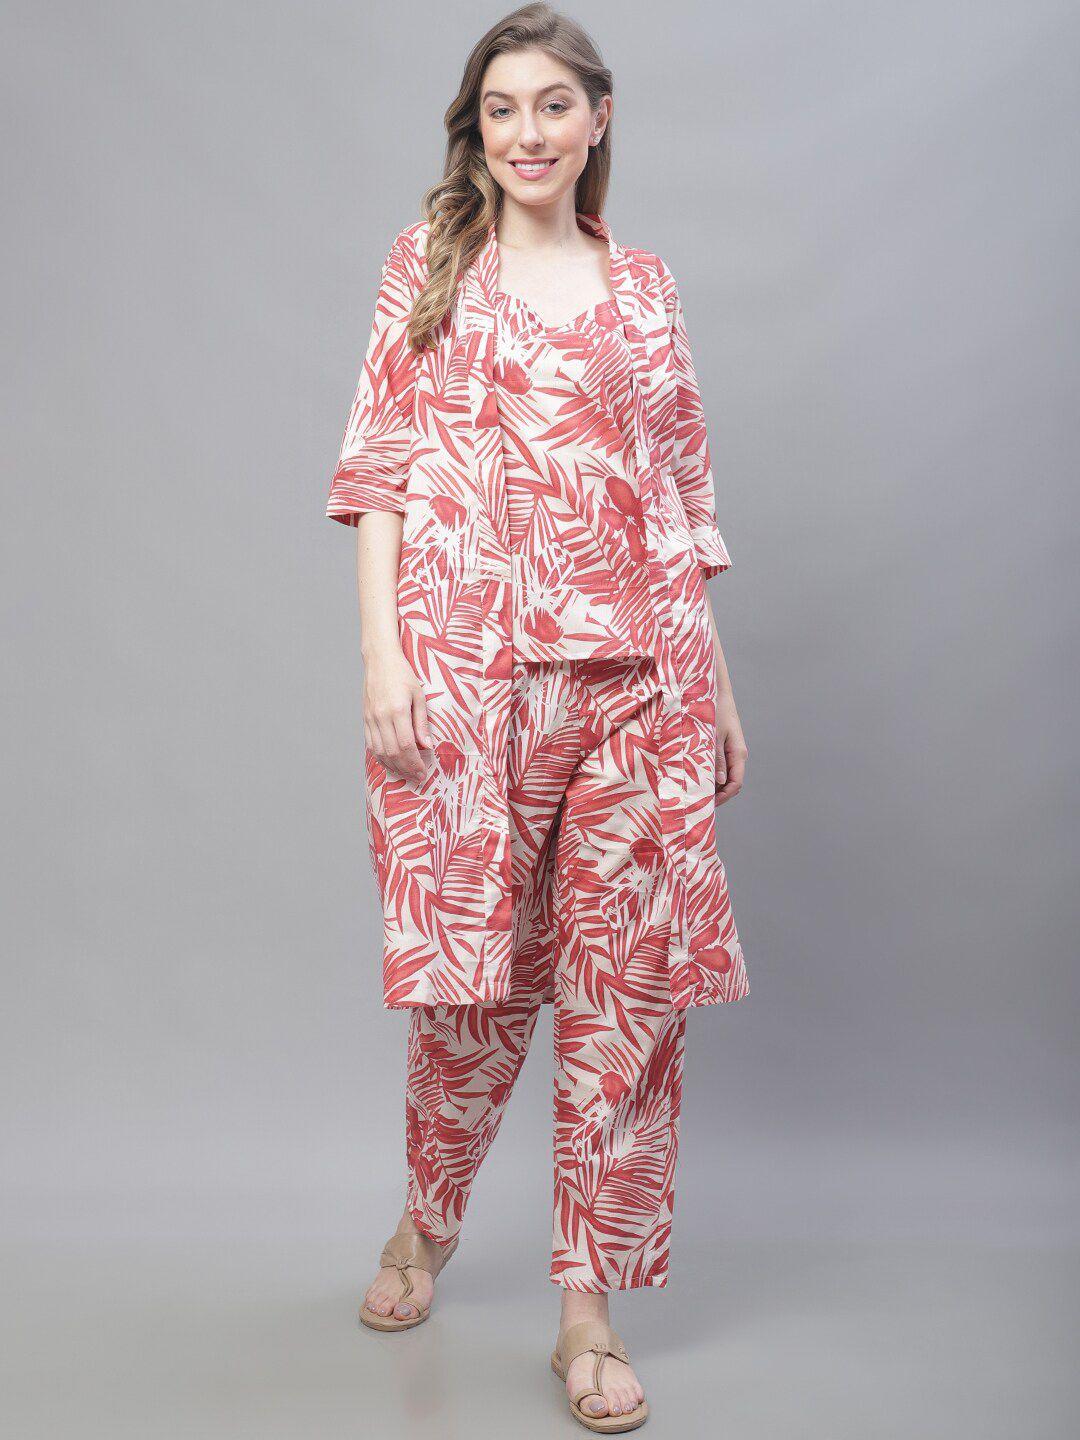 tag 7 floral printed top with palazzos & jacket